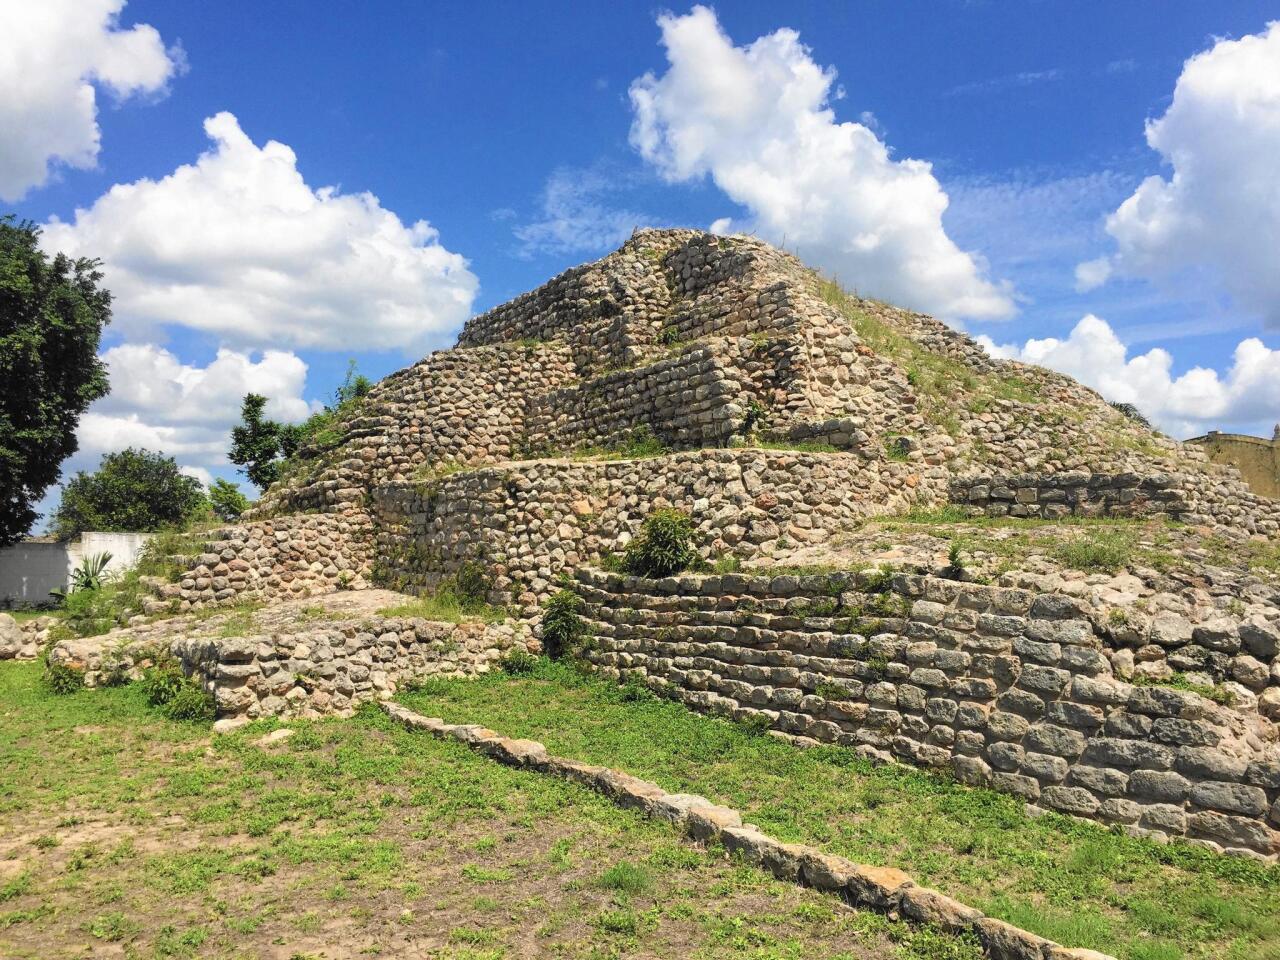 The main pyramid in Acanceh stands over 35 feet tall.